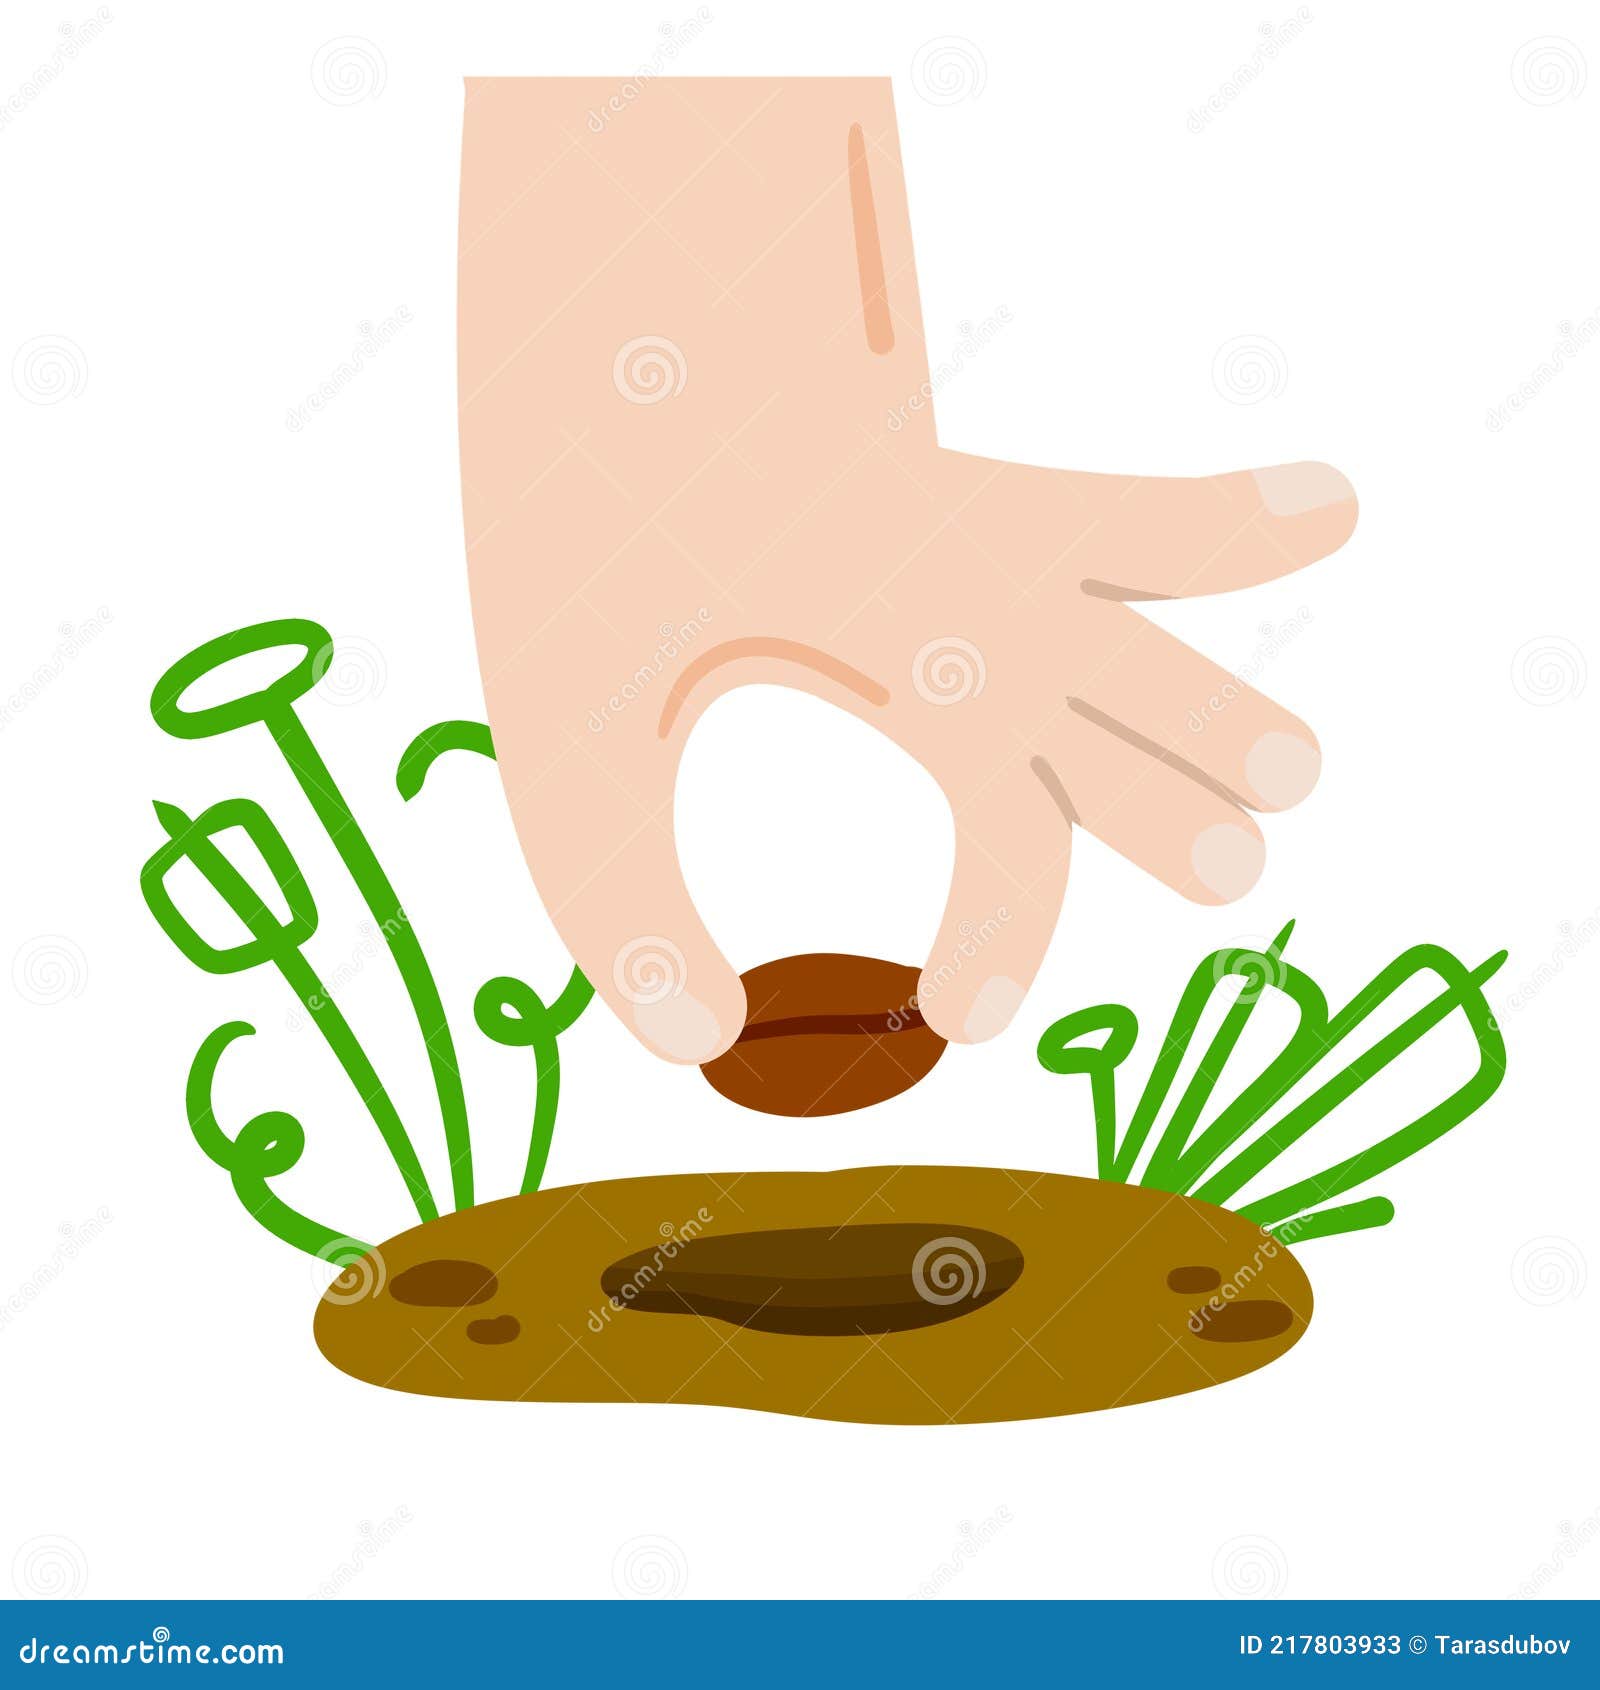 Hand Plants Seeds in Ground. Farmer and Harvest. Village Work. Growing  Natural Food Stock Vector - Illustration of seeds, nature: 217803933